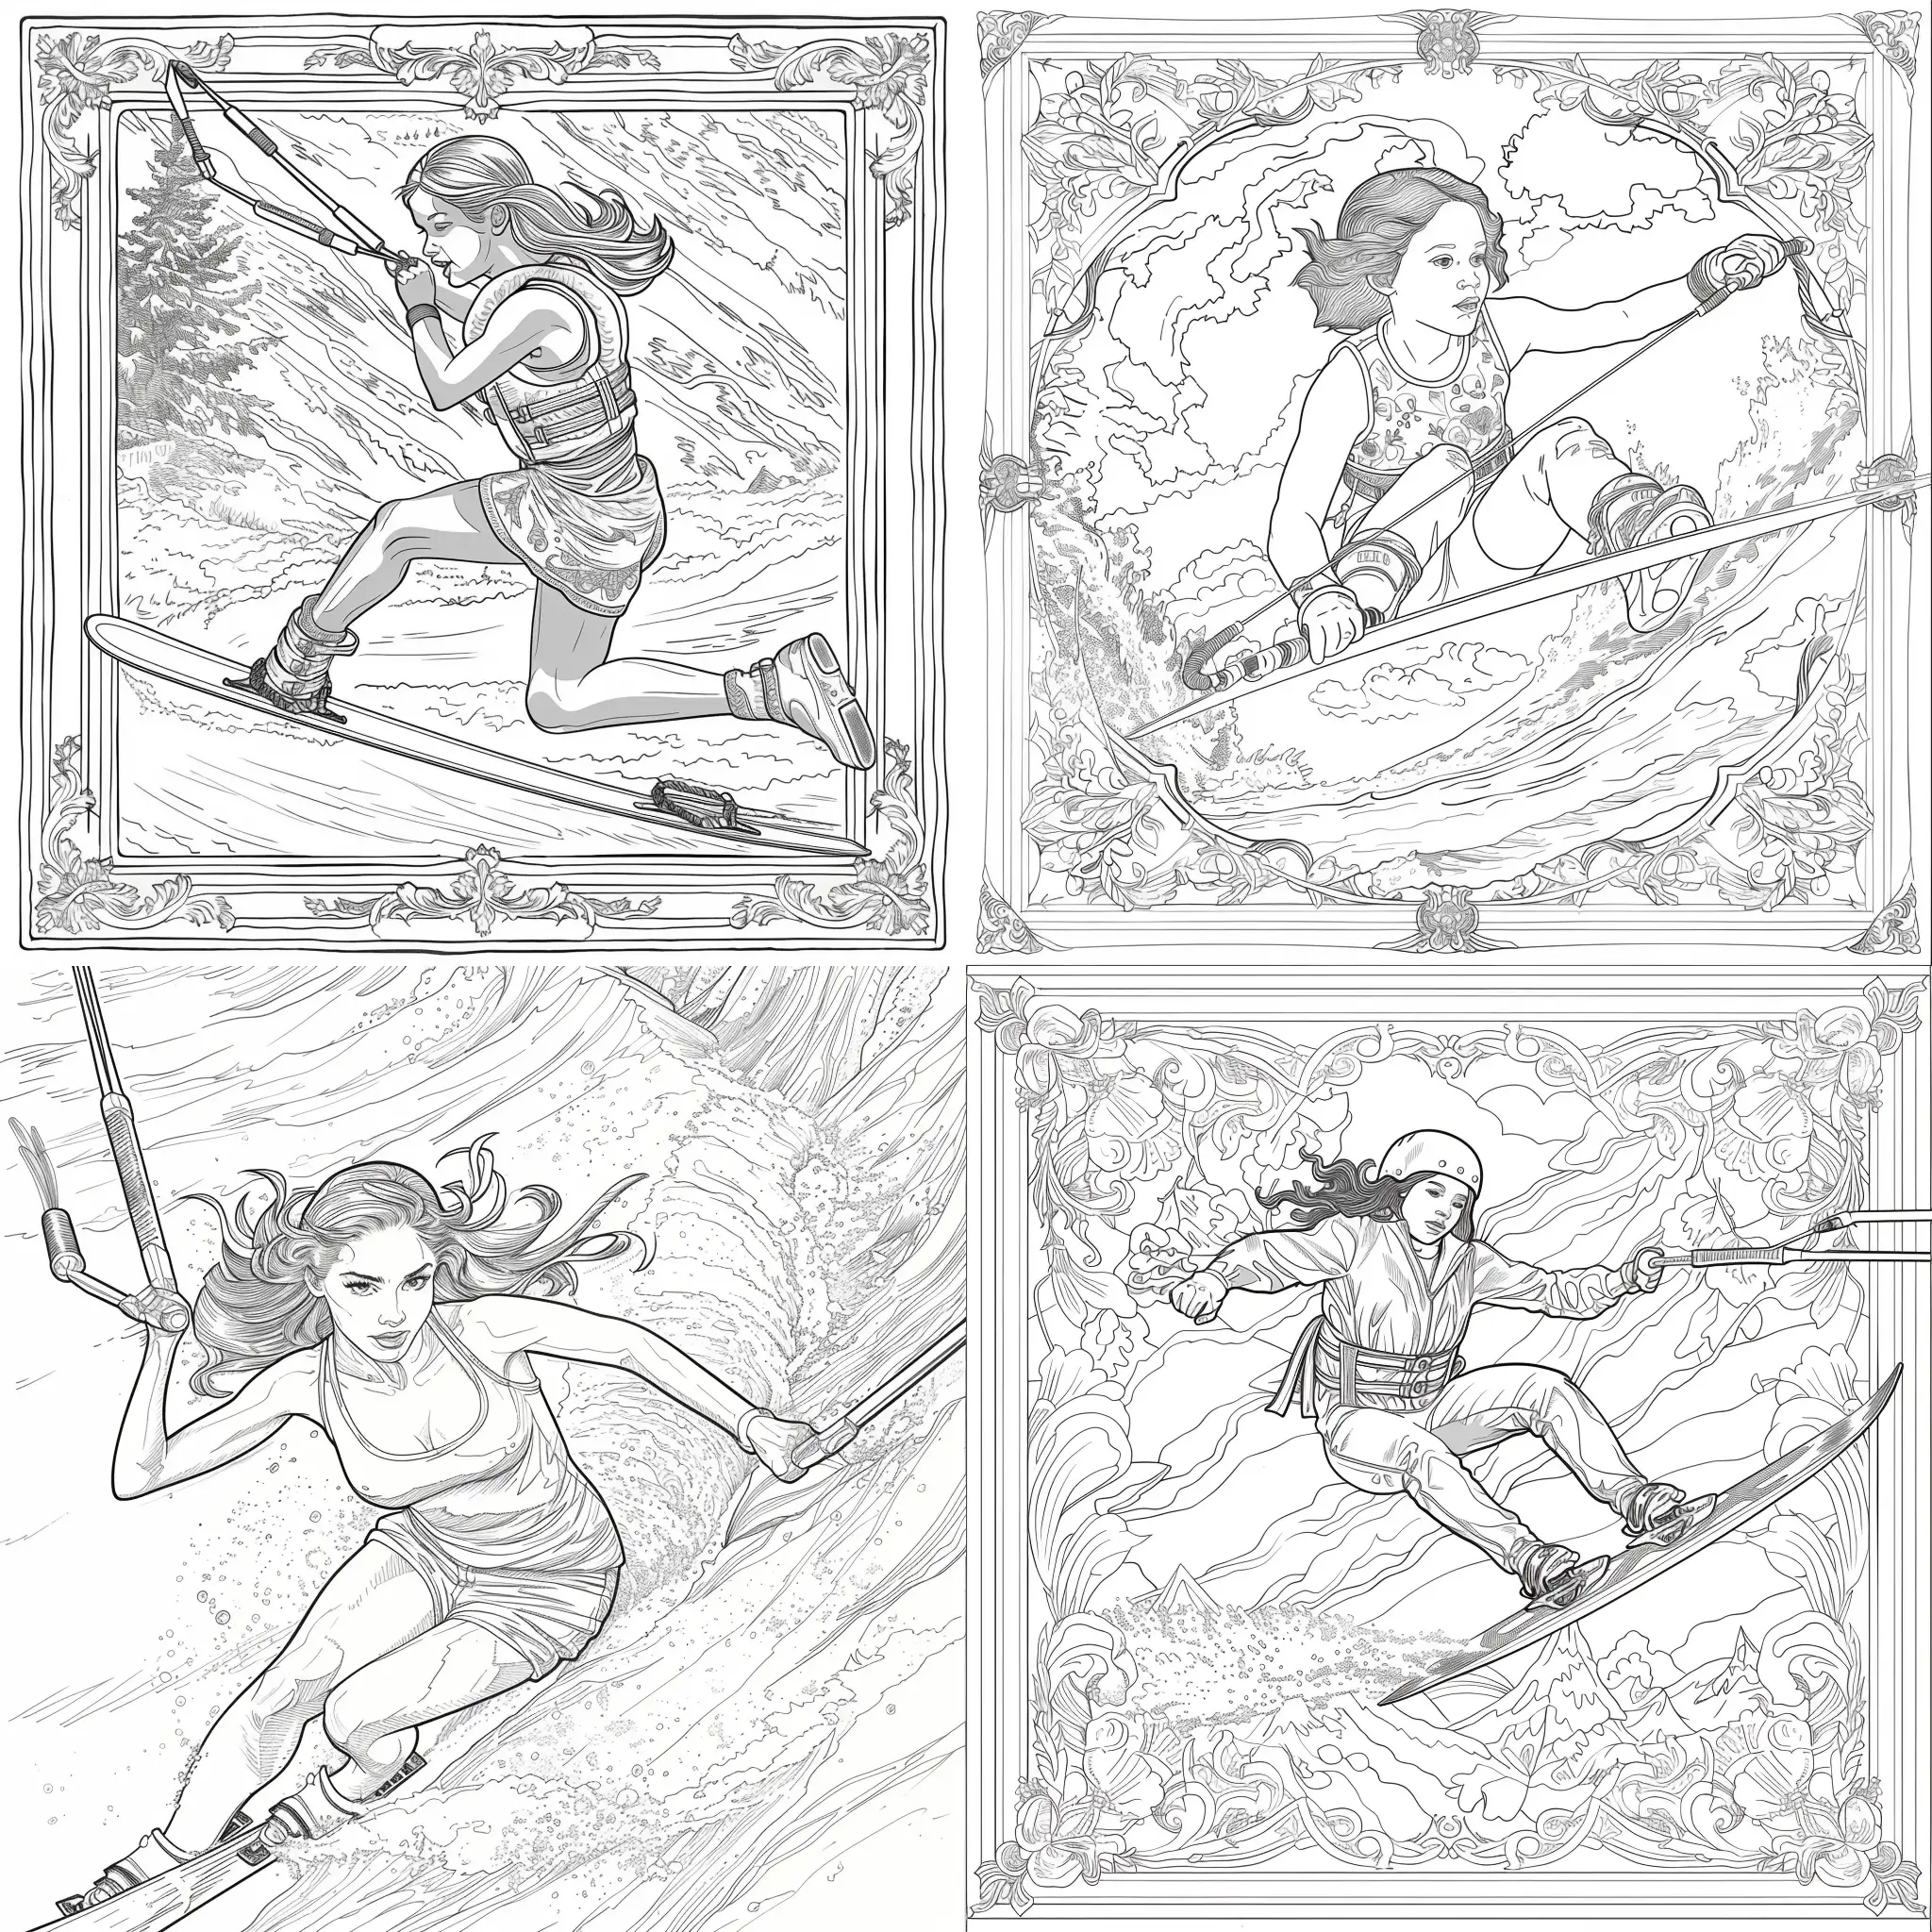 Coloring book page with a girl waterskiing, A:23, no frame, no background.